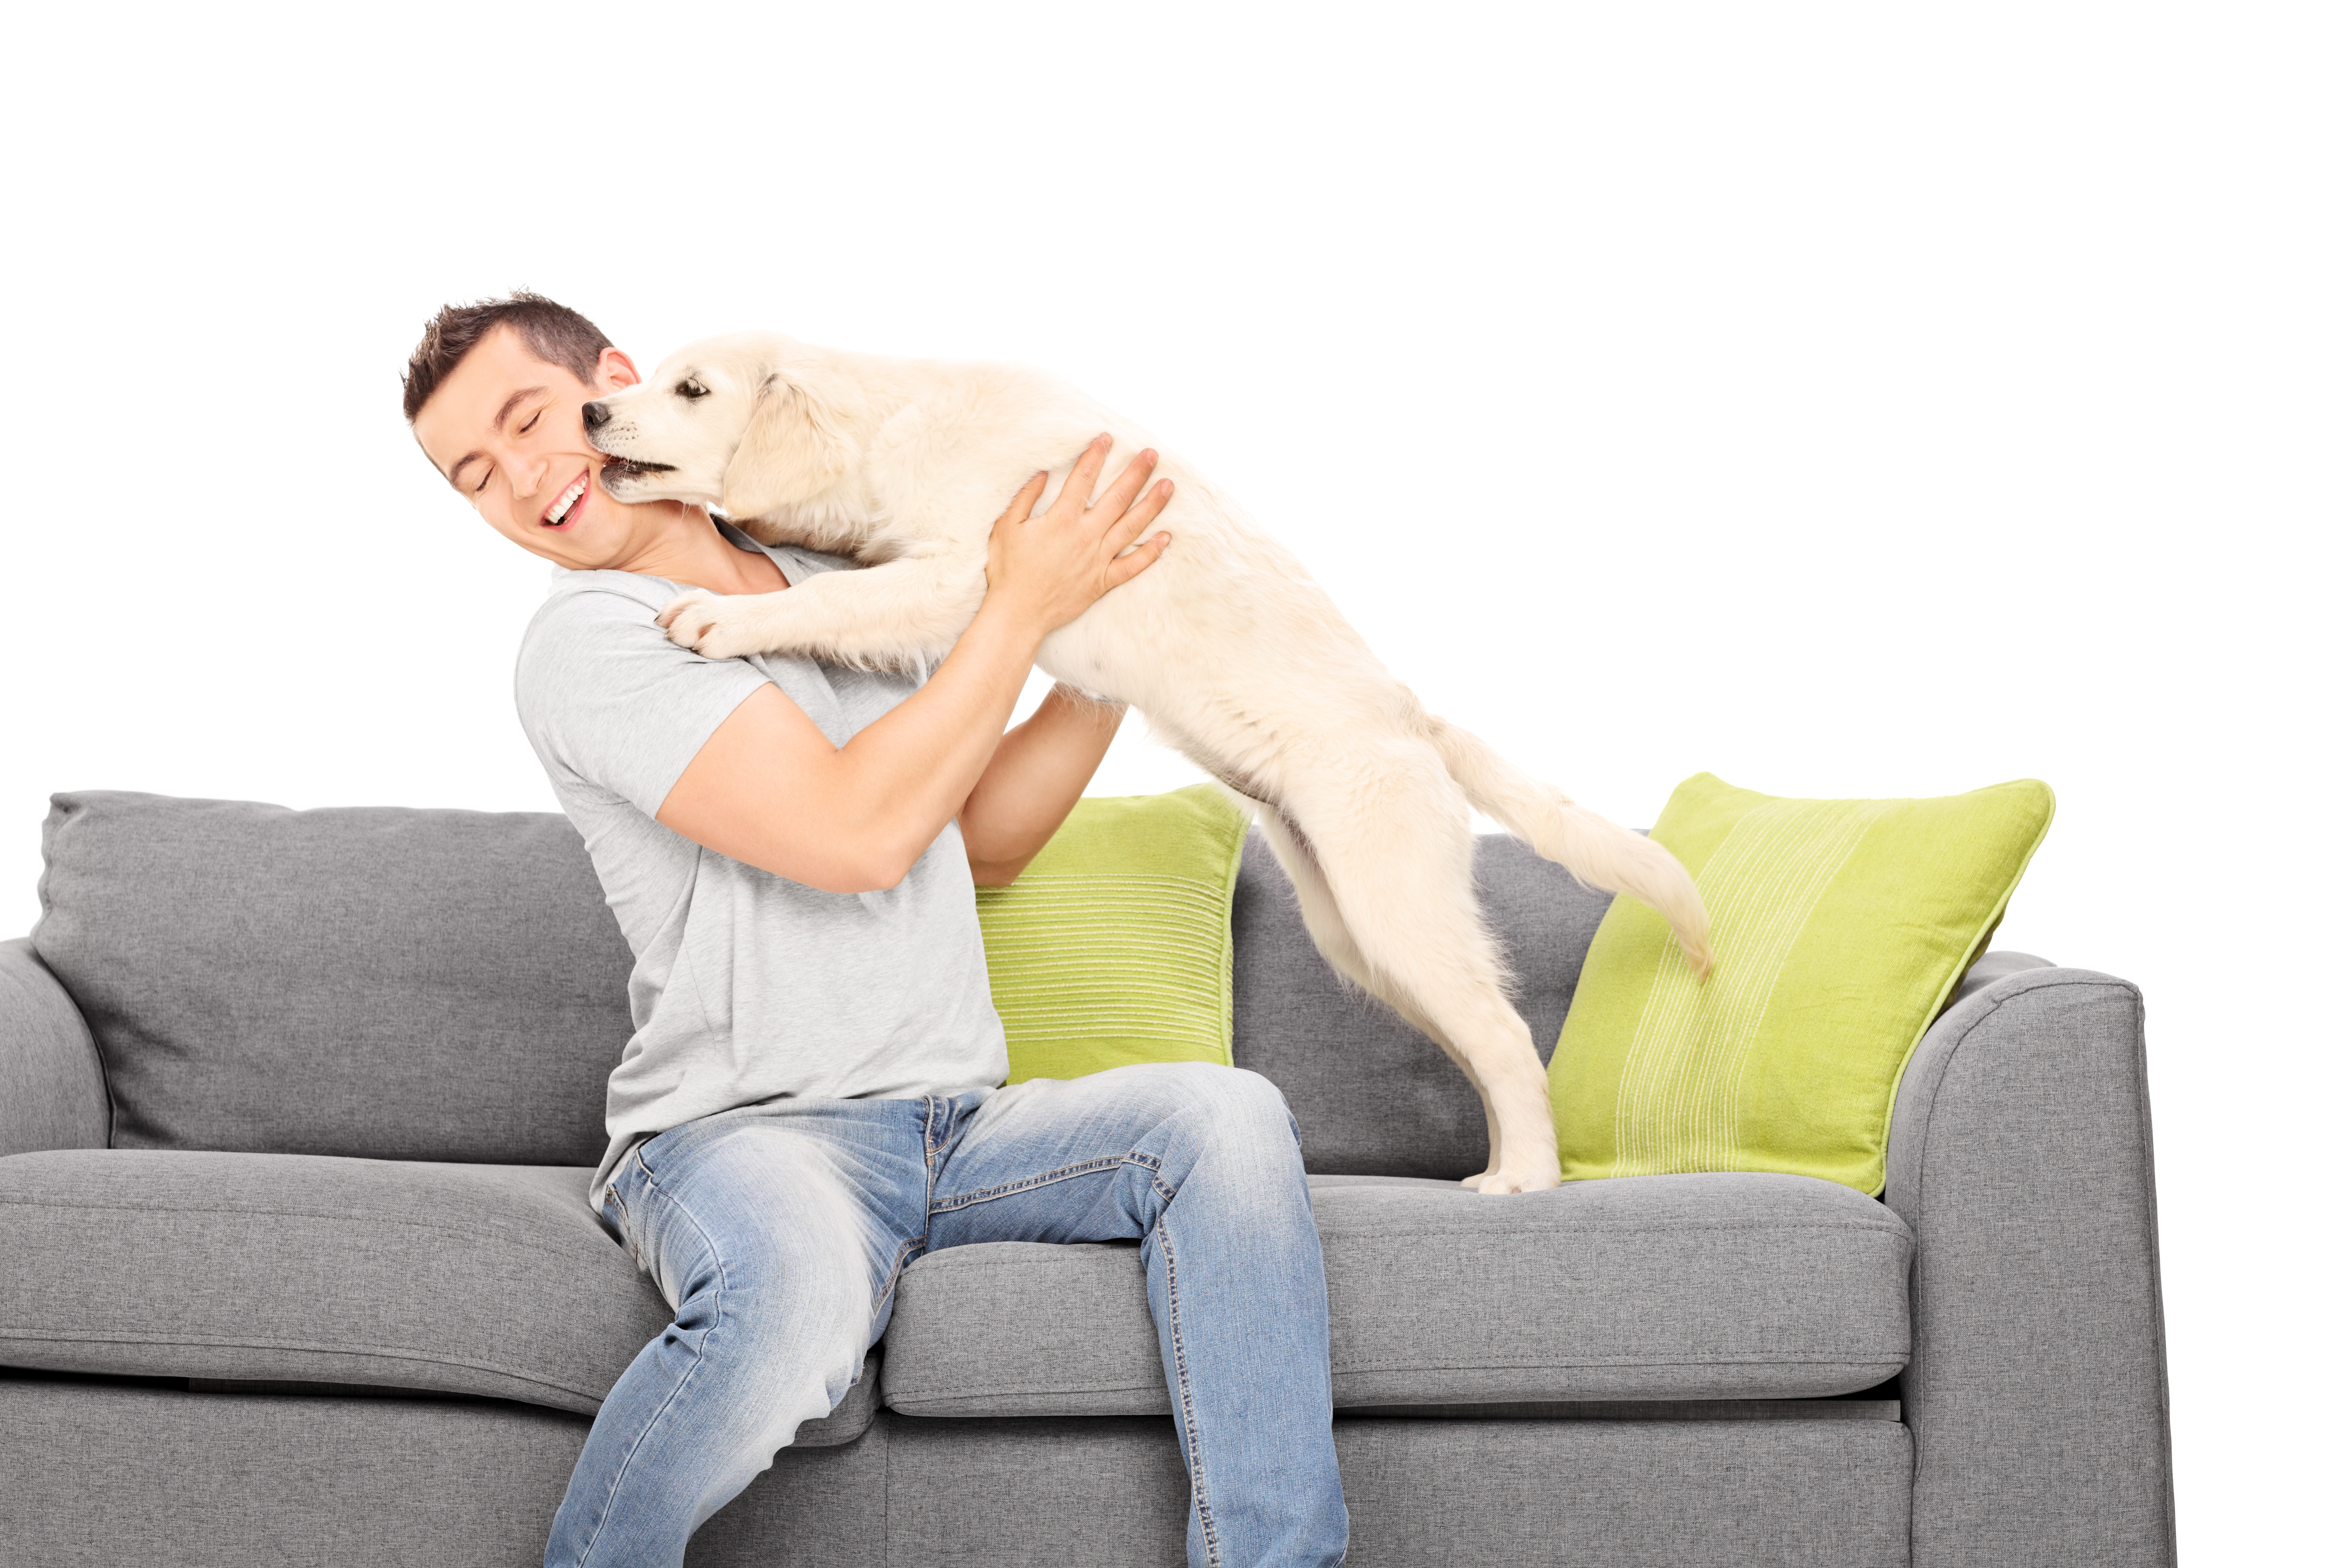 Man playing with a puppy seated on sofa isolated on white background